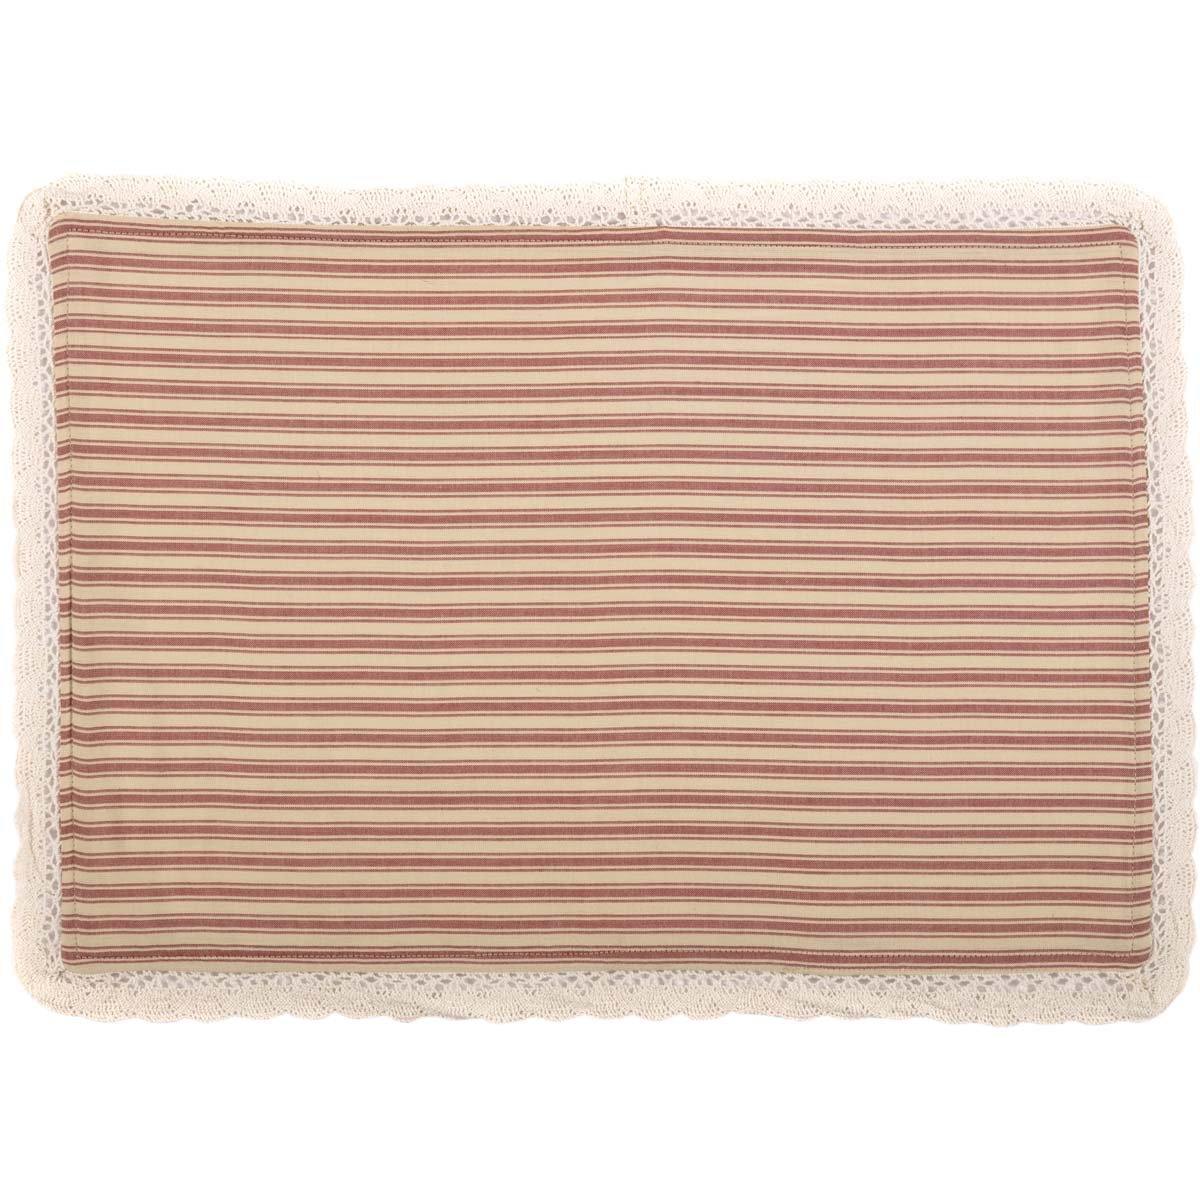 Kendra Stripe Red Placemat Set of 6 VHC Brands - The Fox Decor